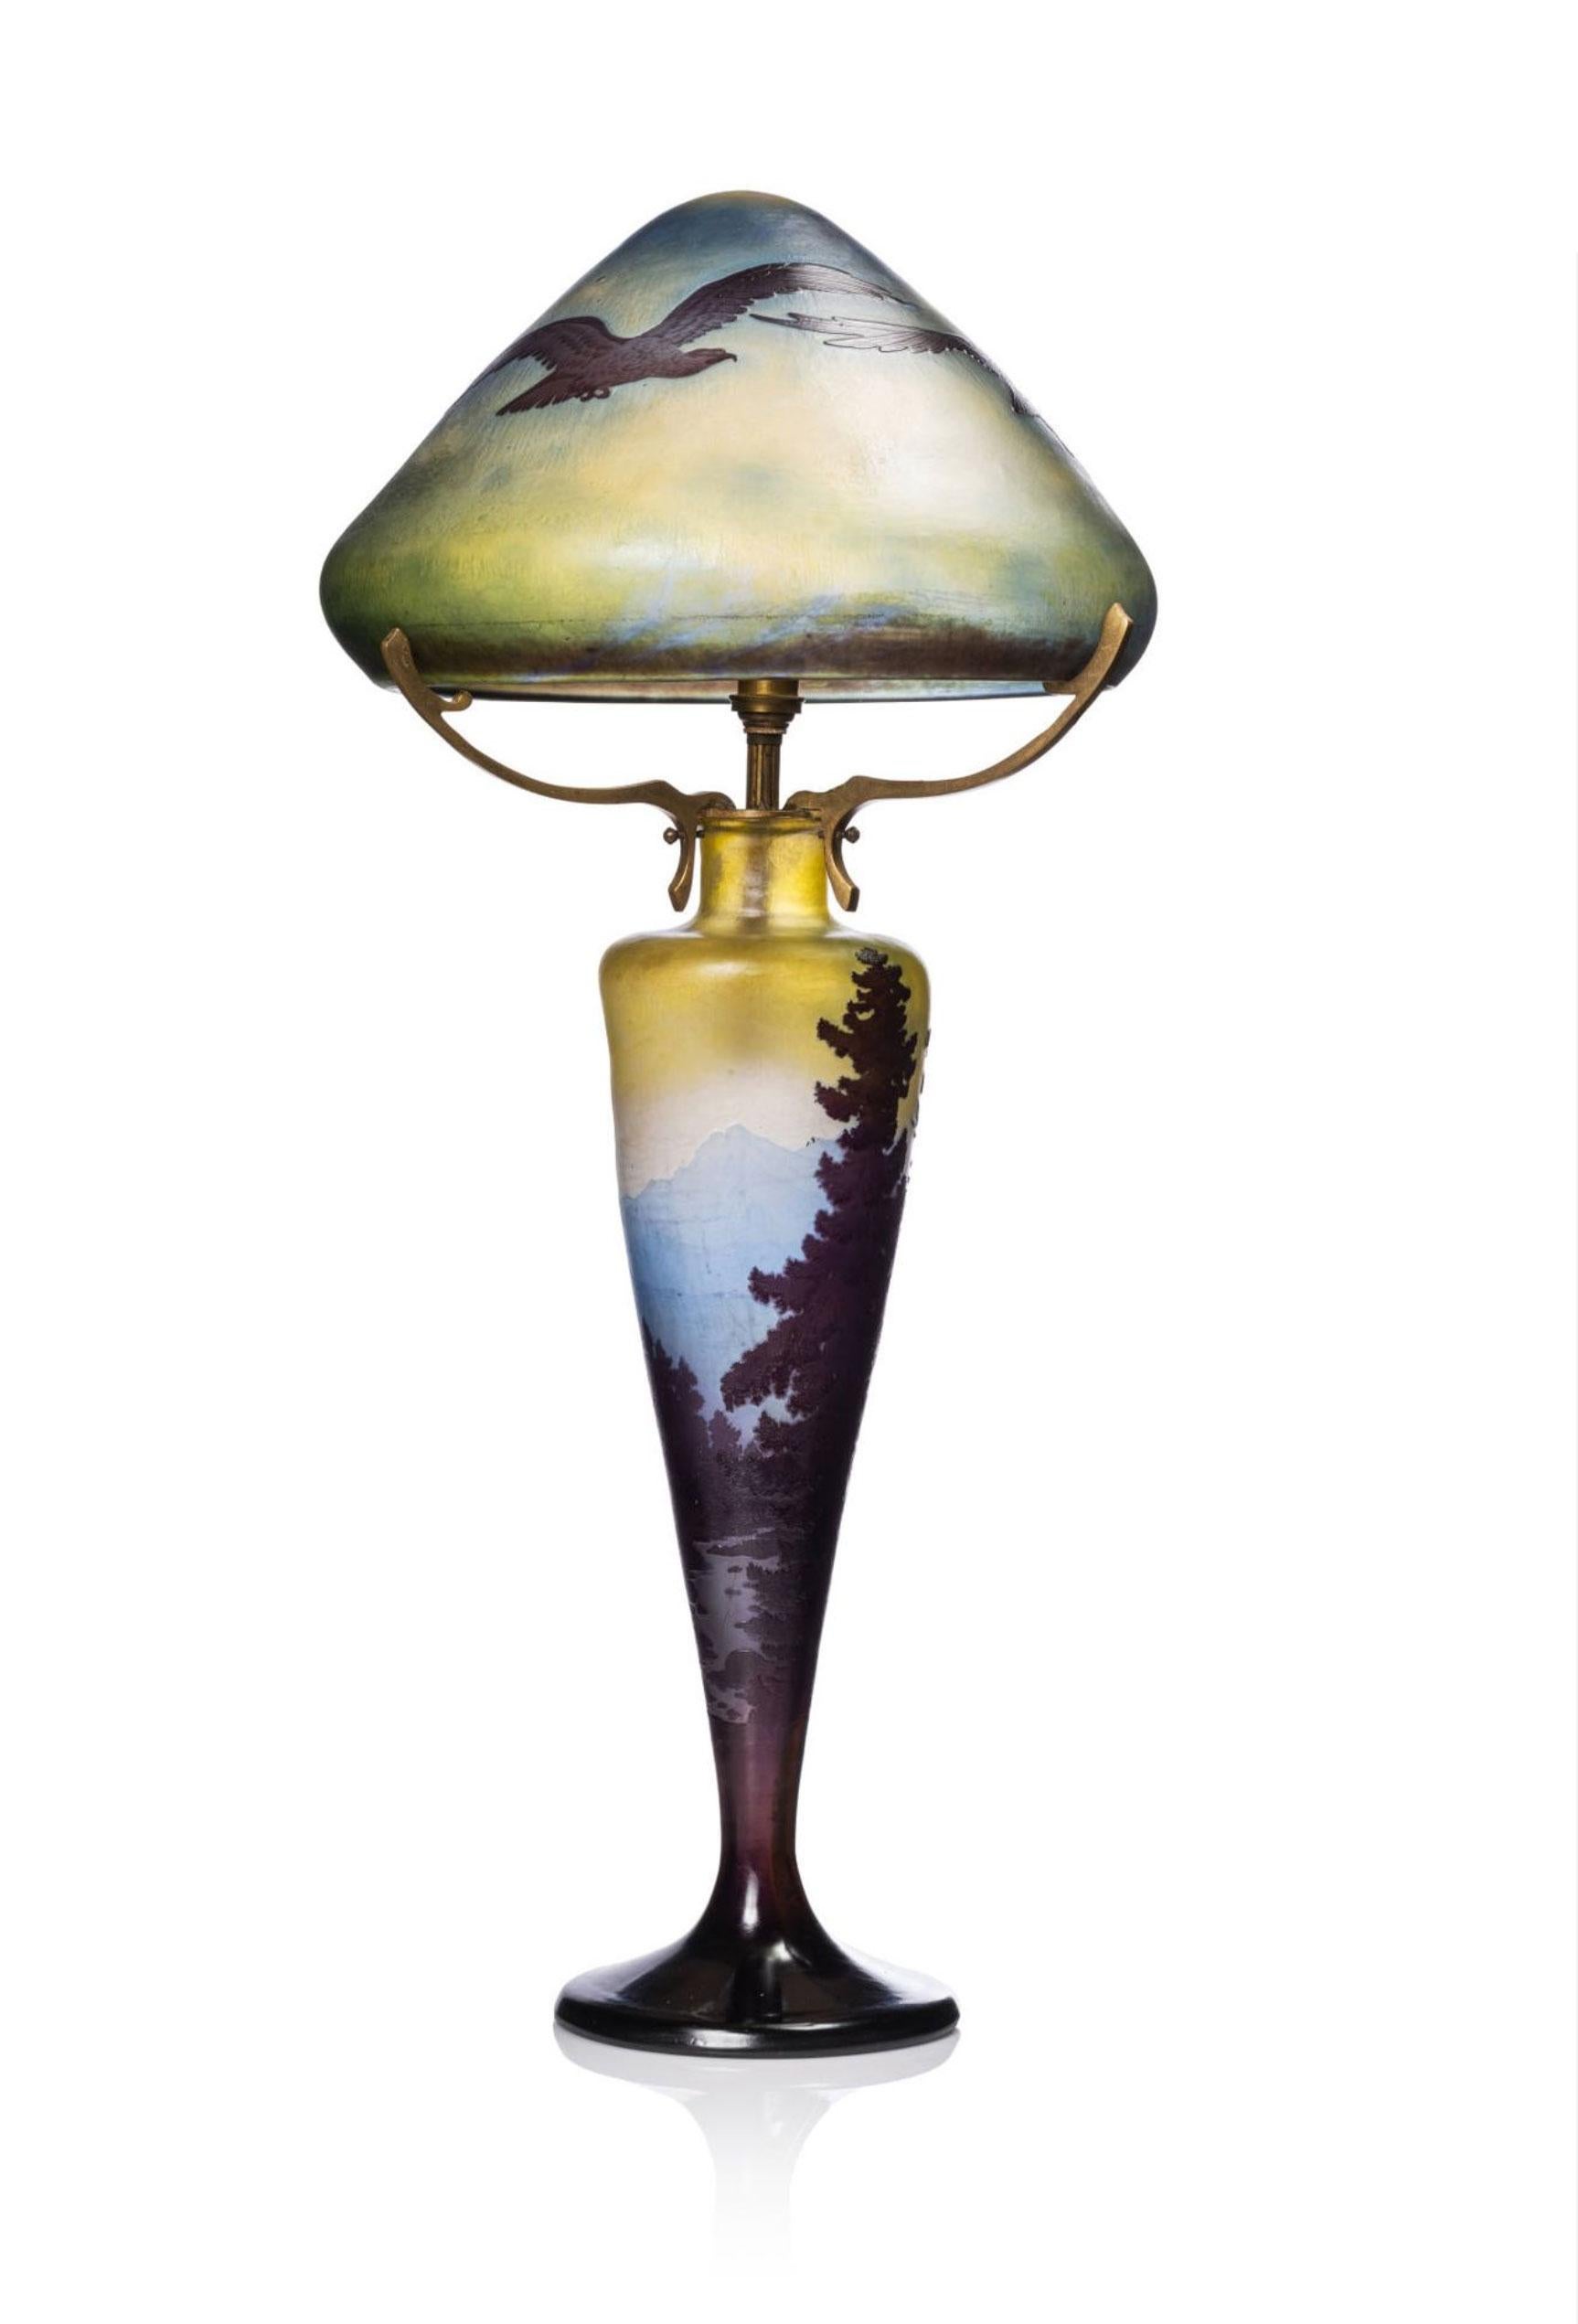 Hand-Carved French Art Nouveau Table Lamp by Emile Galle ''Vosges Paysage'' Cameo Glass 1900 For Sale